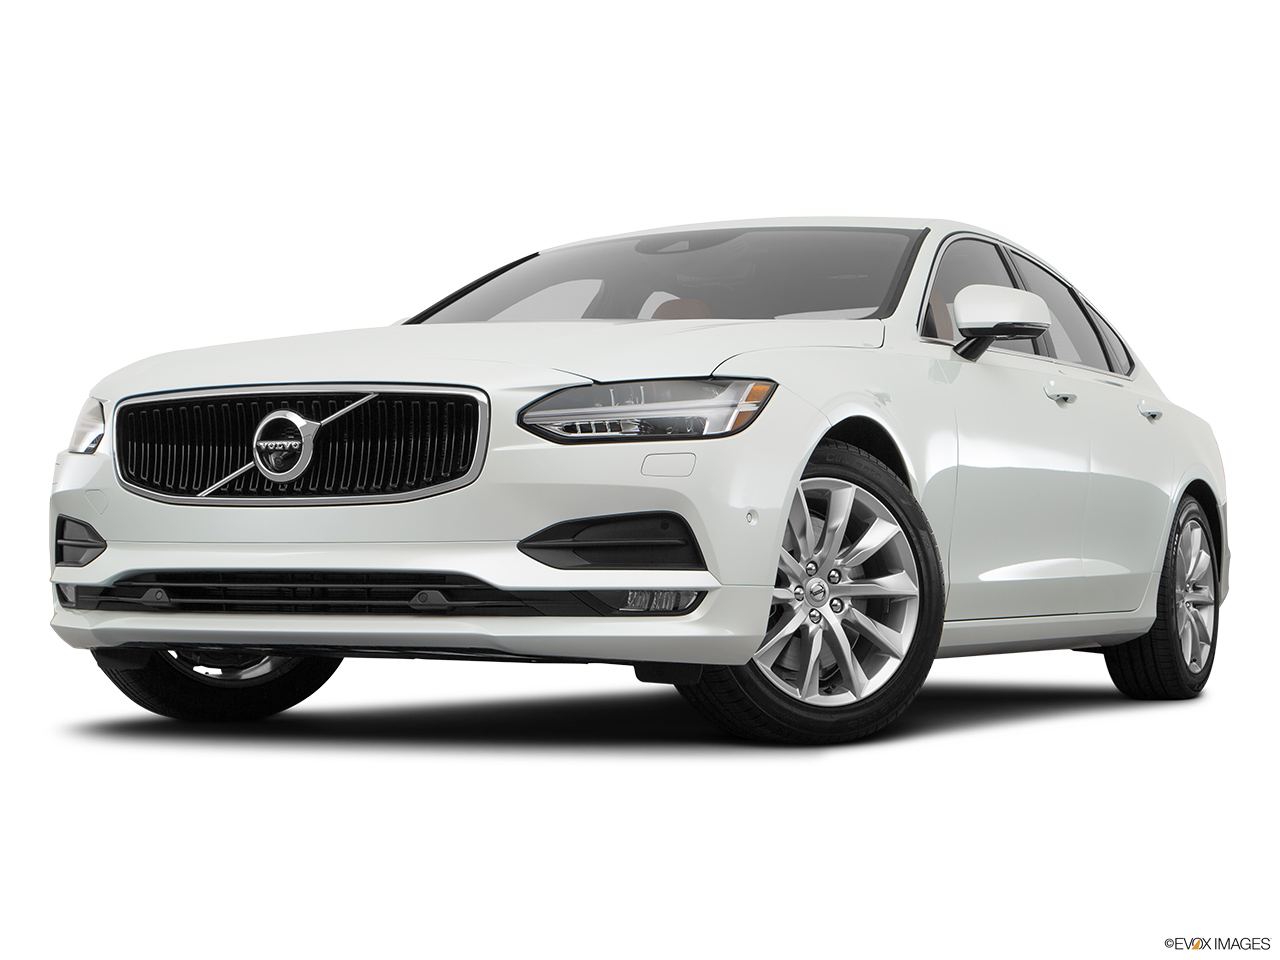 2017 Volvo S90 T6 Momentum Front angle view, low wide perspective. 